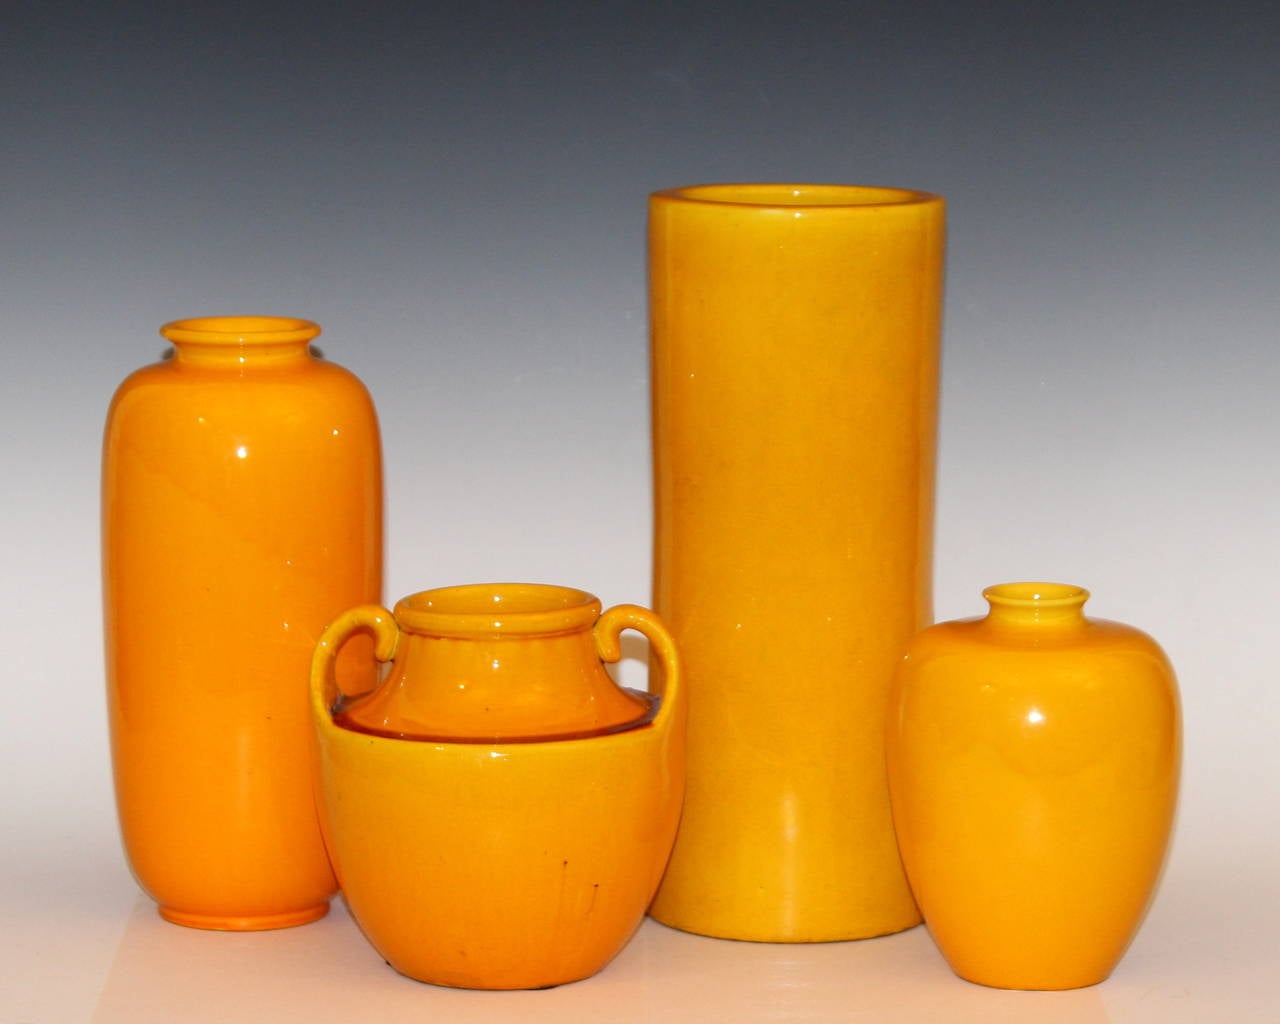 Four hand thrown Awaji Pottery vases in glowing yellow glaze, circa 1910-1930.
Tallest is 12